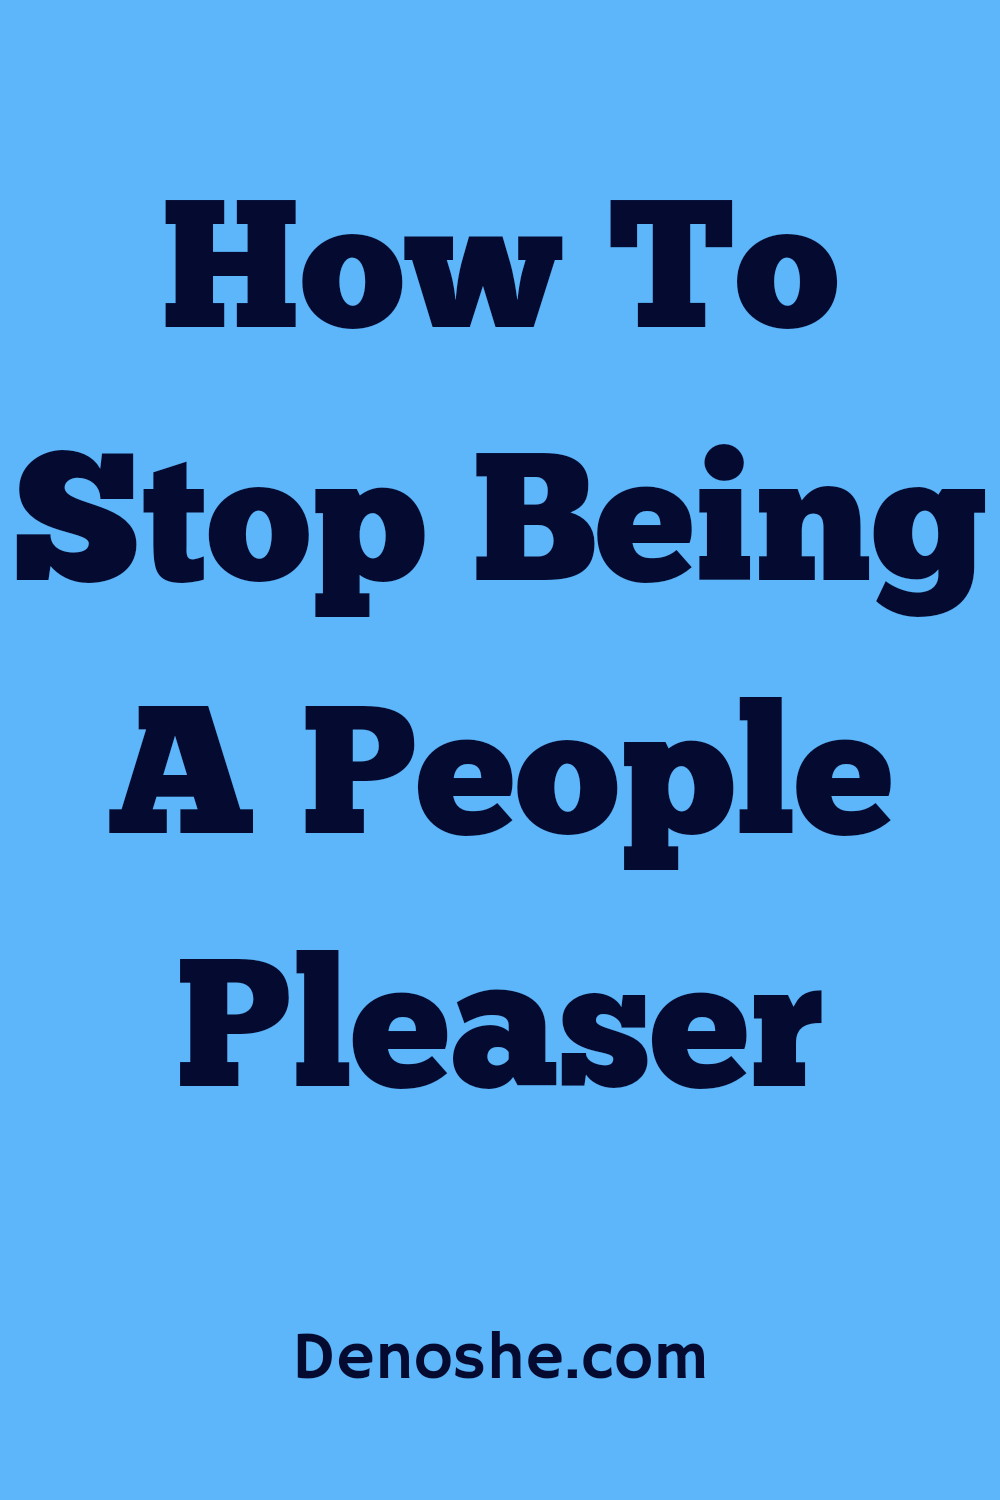 Here are ten (10) ways to stop being a people pleaser.